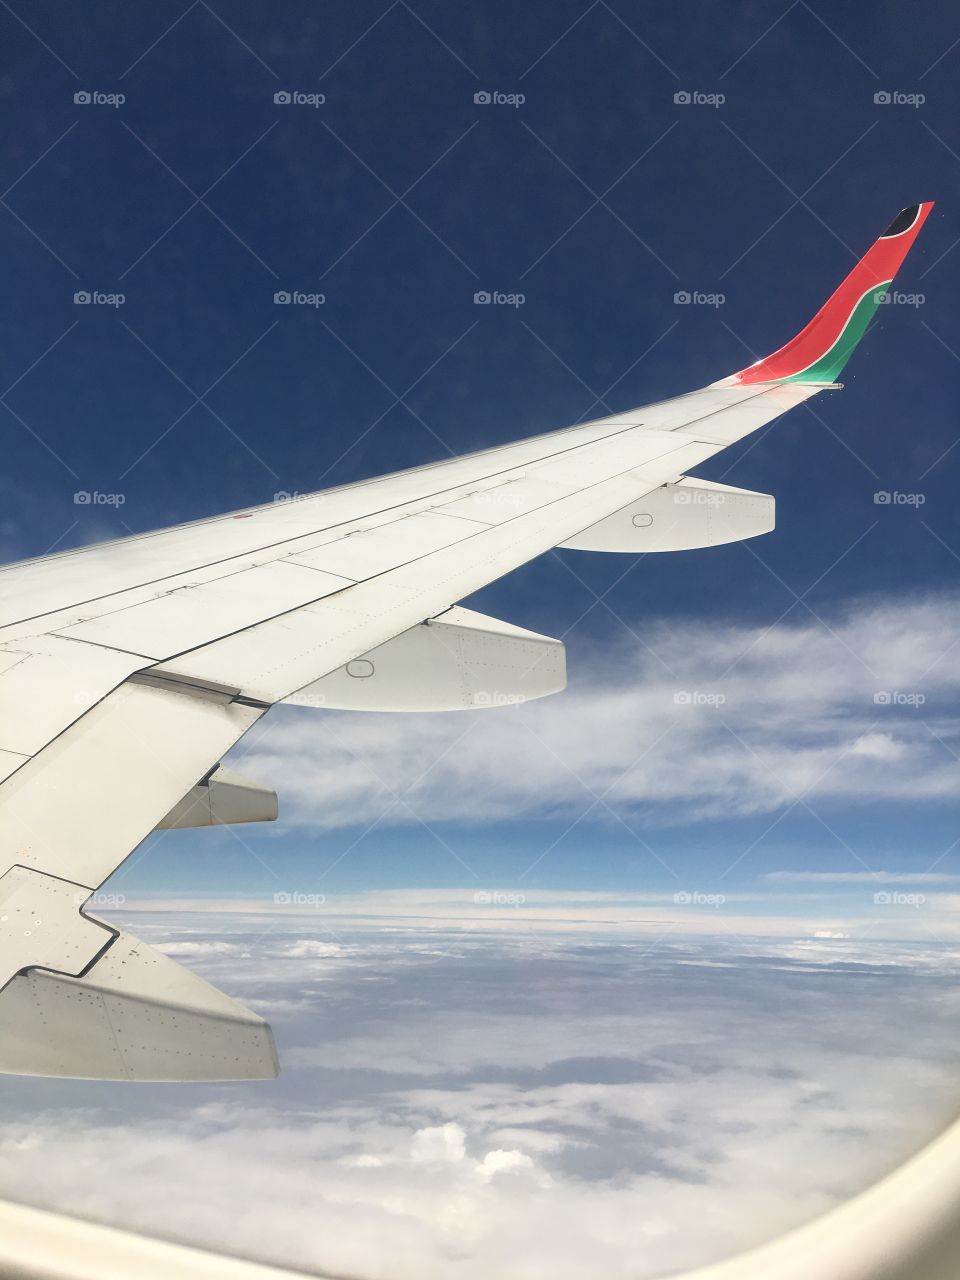 En route to Nairobi city from Kisumu city. Kenya Airways is the flag carrier airline of Kenya and a full member of the sky team. The company’s slogan is ‘’ The pride of Africa’’